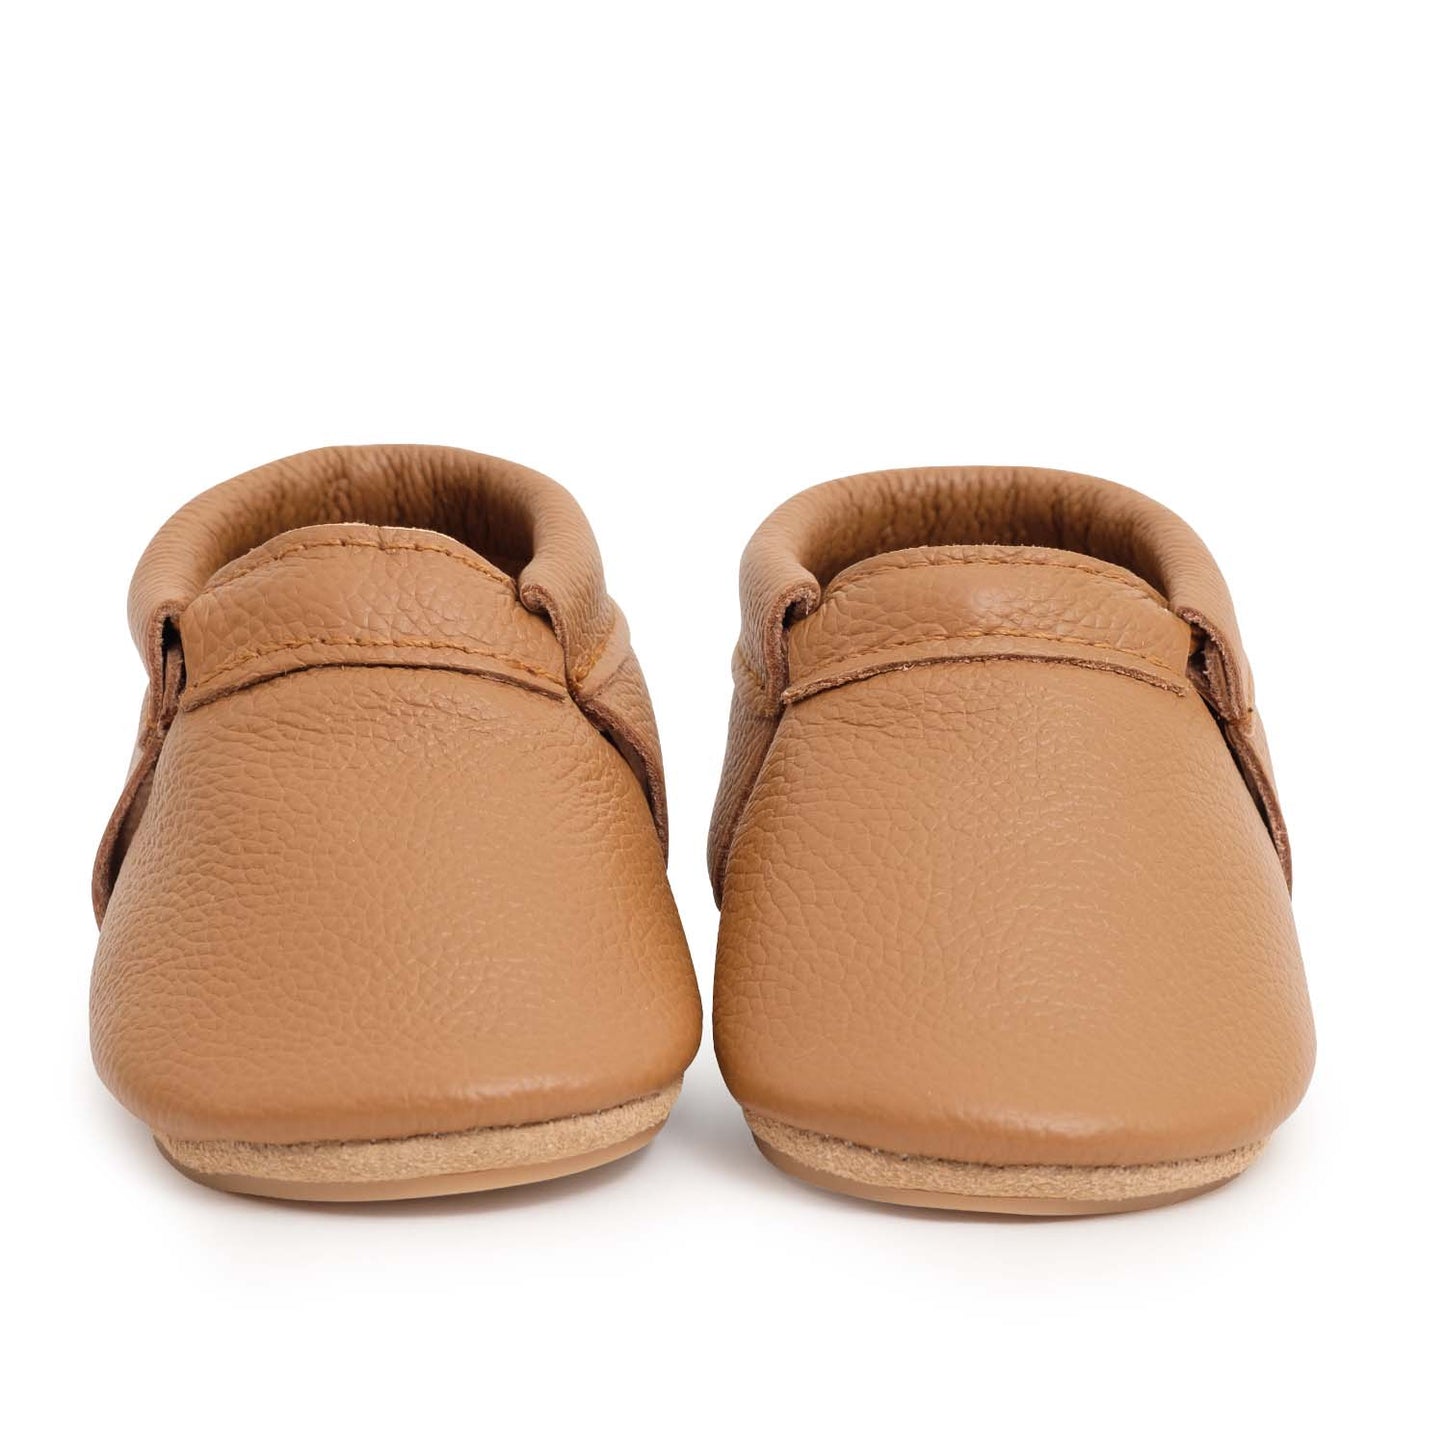 Hard Sole Fringeless Baby Moccasins -  Baby Shoes (Brown)